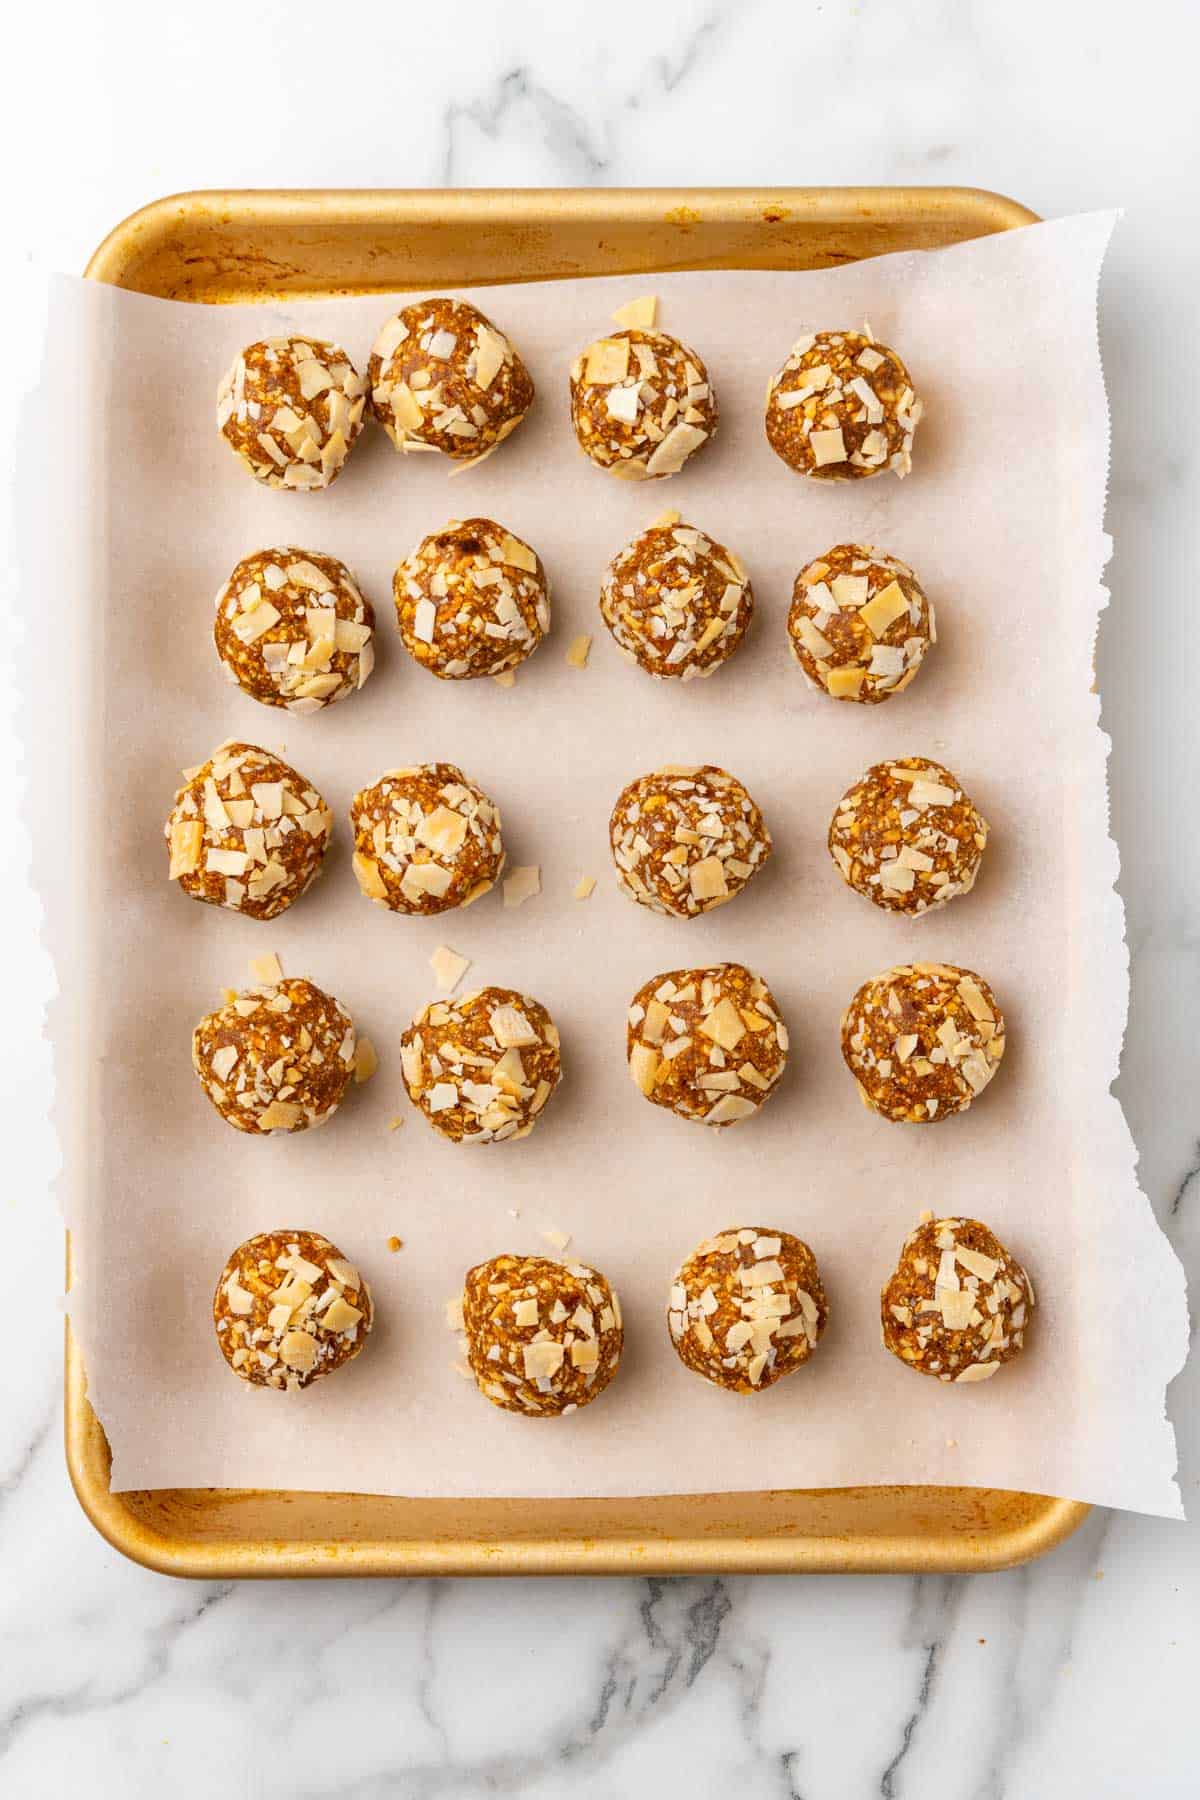 Date balls on a baking sheet lined with parchment paper, as seen from above on a white marble countertop